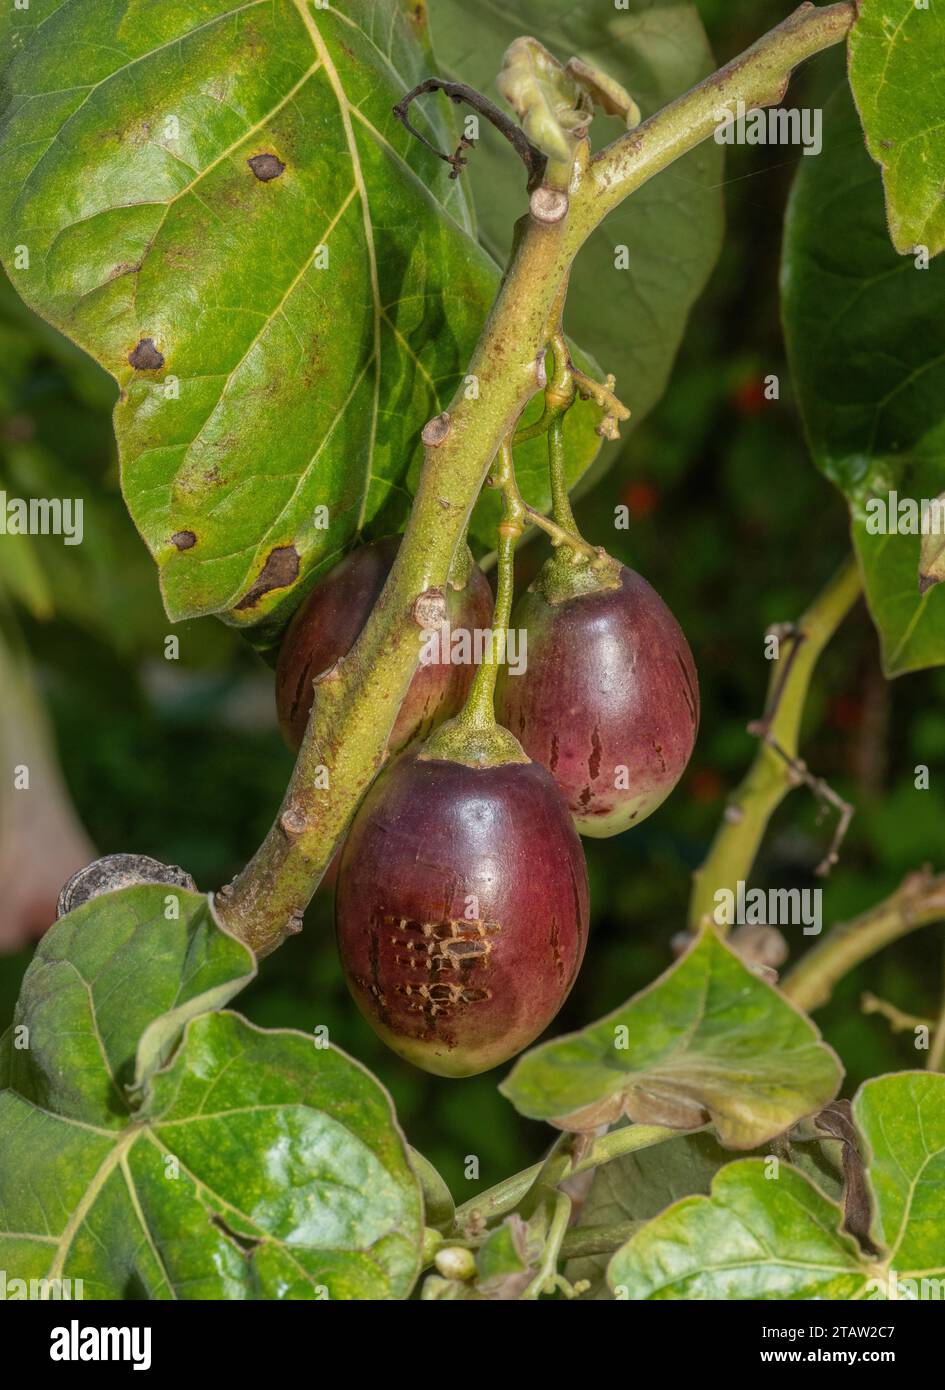 Tamarillo, or Tree Tomato Cyphomandra betacea, in fruit in autumn. From the Andes, widely cultivated. Stock Photo